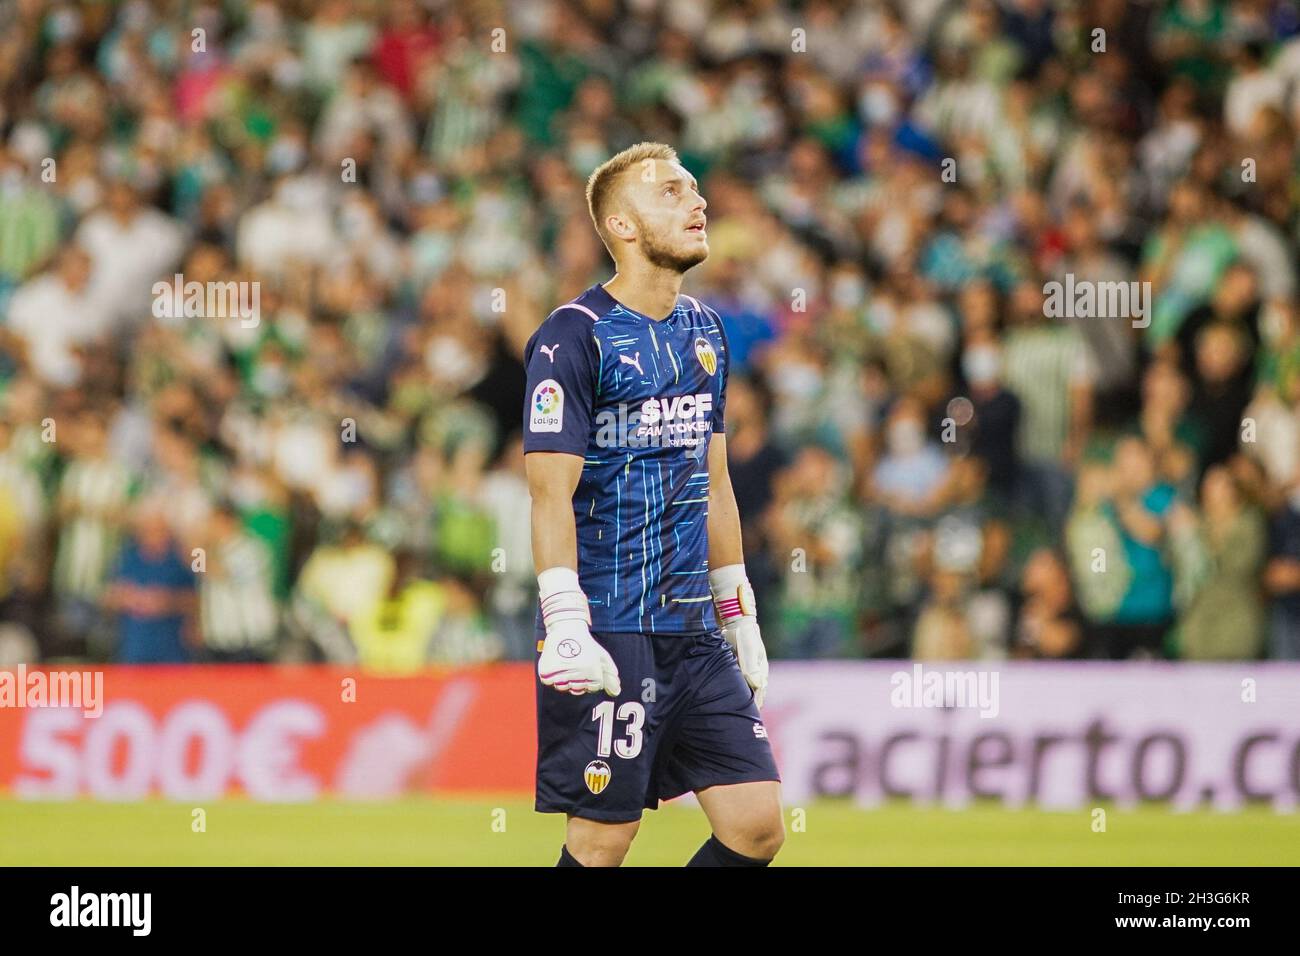 Seville, Spain. 27th Oct, 2021. Jasper Cillessen in action during the La Liga Santander match between Real Betis and Valencia CF at Benito Villamarin Stadium. (Final Score: Real Betis 4:1 Valencia CF). Credit: SOPA Images Limited/Alamy Live News Stock Photo